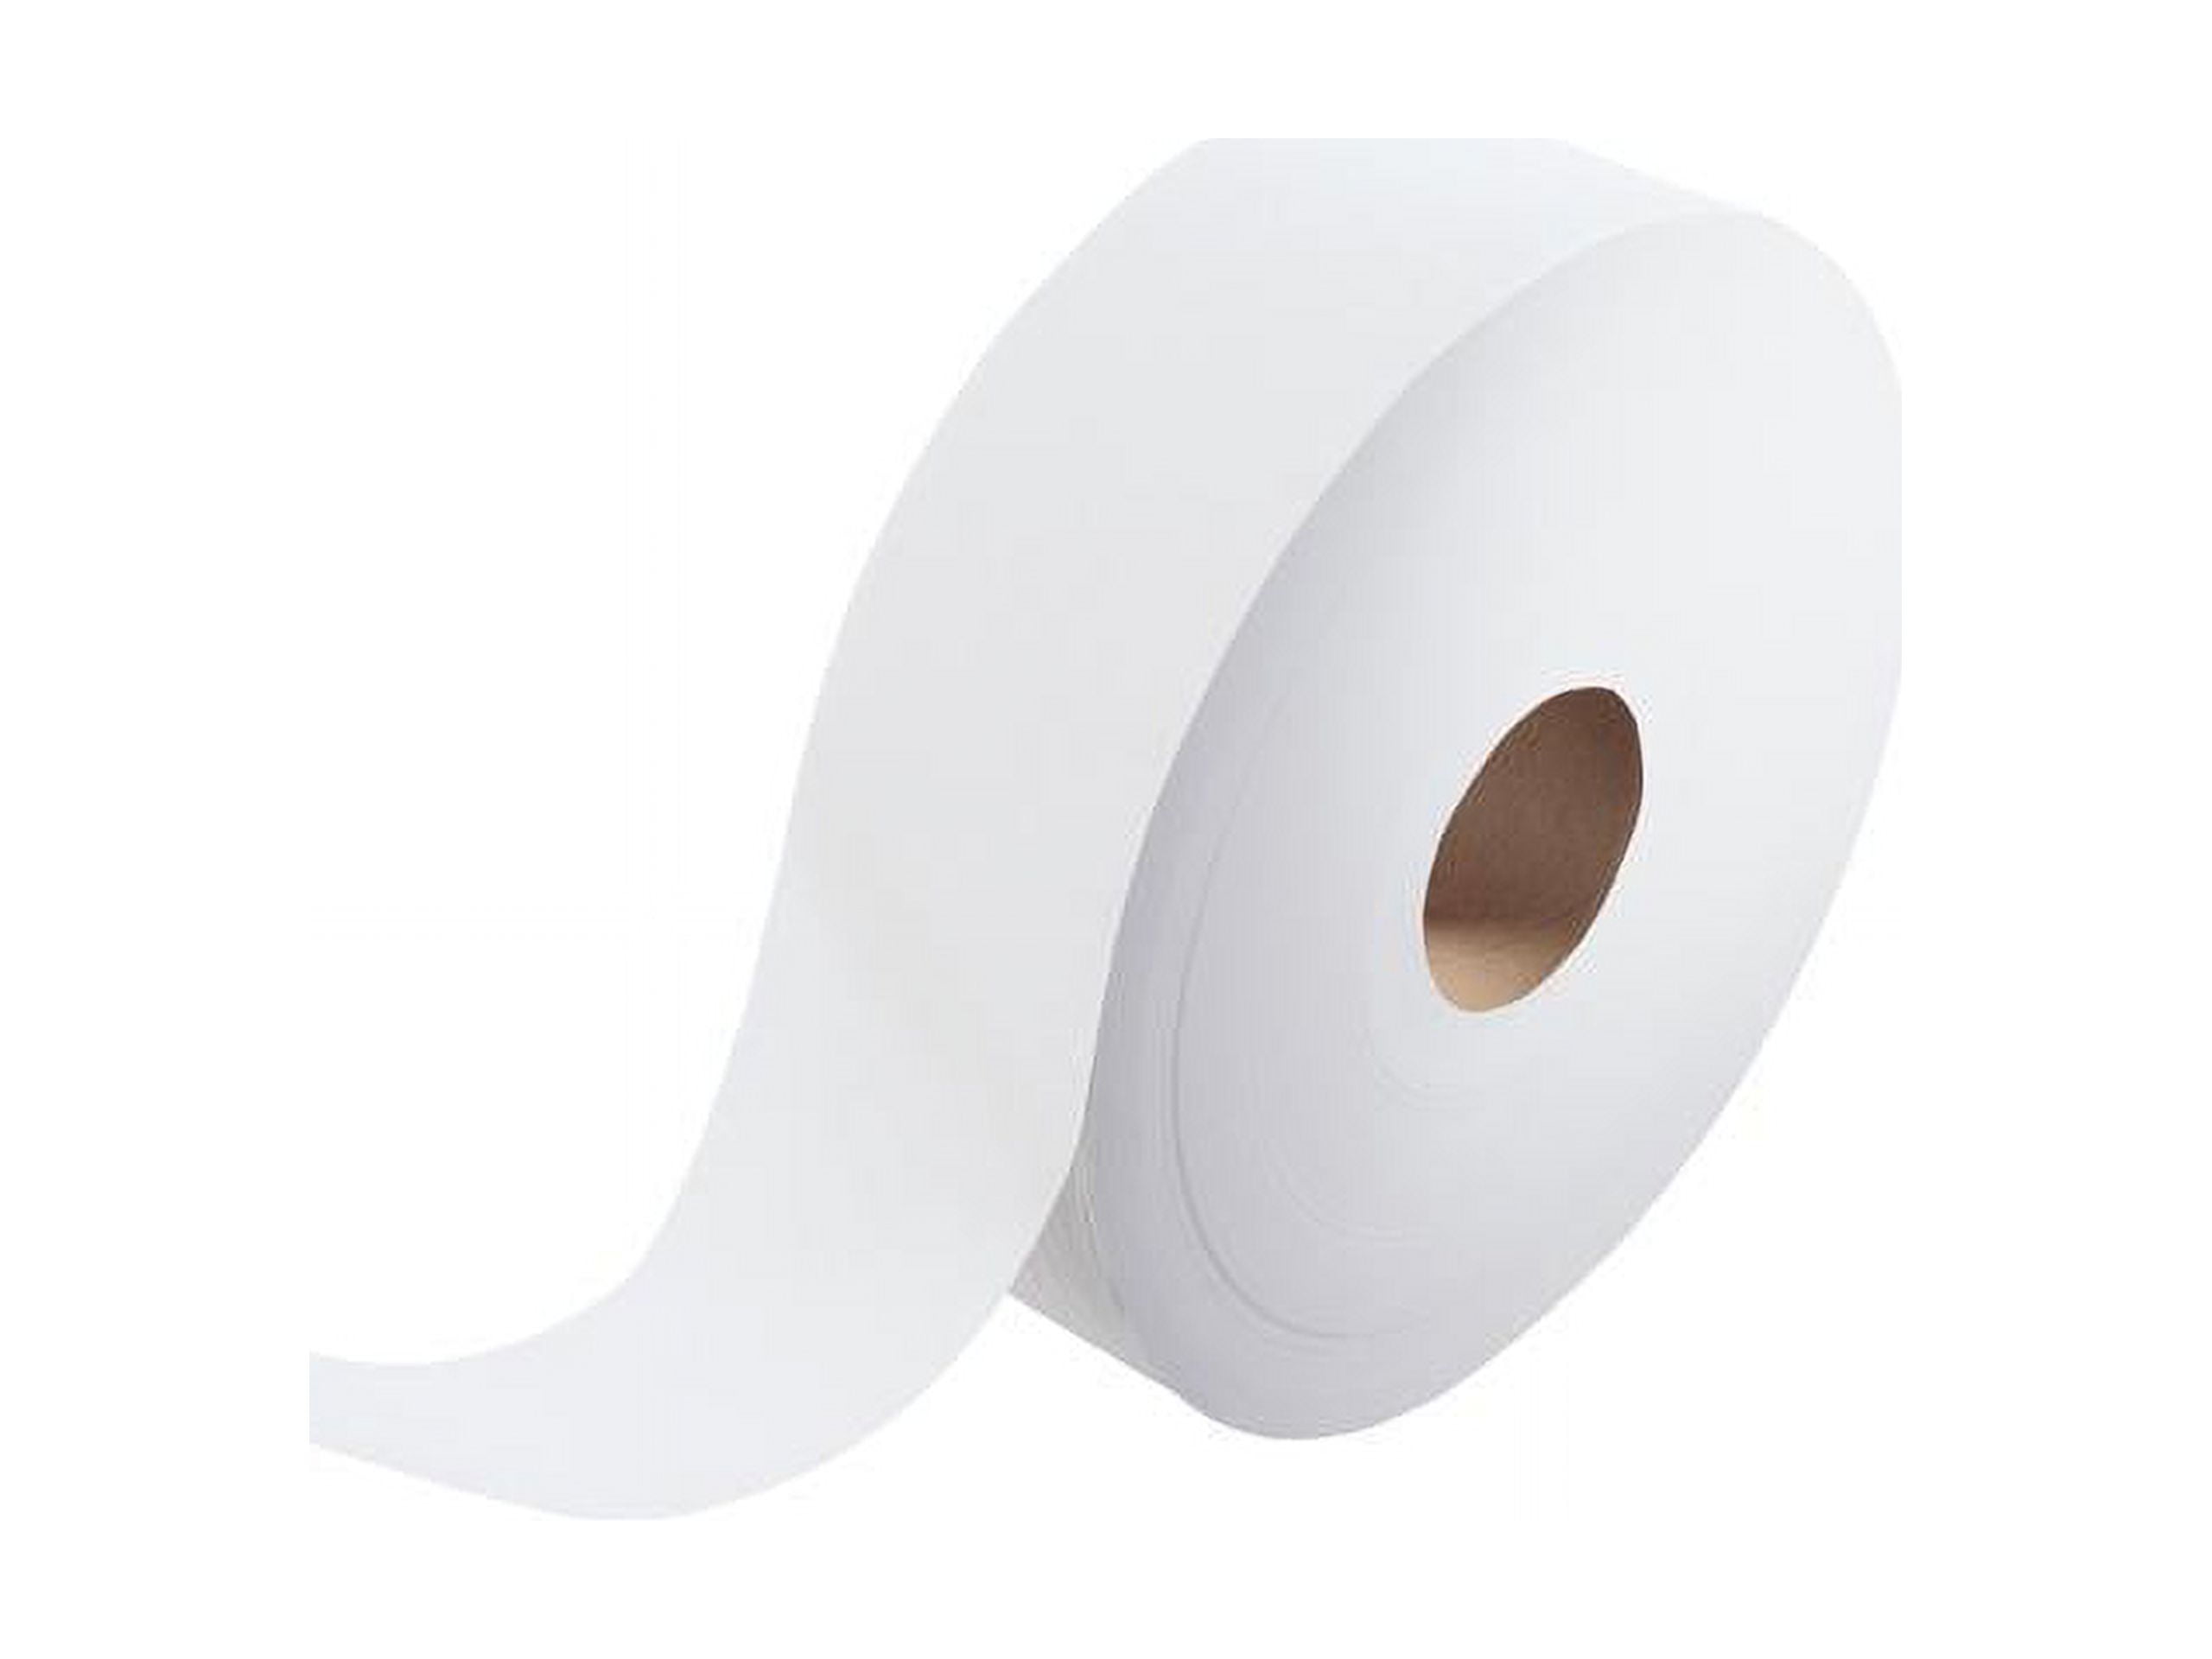 Scott® Professional 100% Recycled Fiber Roll Toilet Paper 473 Ct (Pack of  80) ..